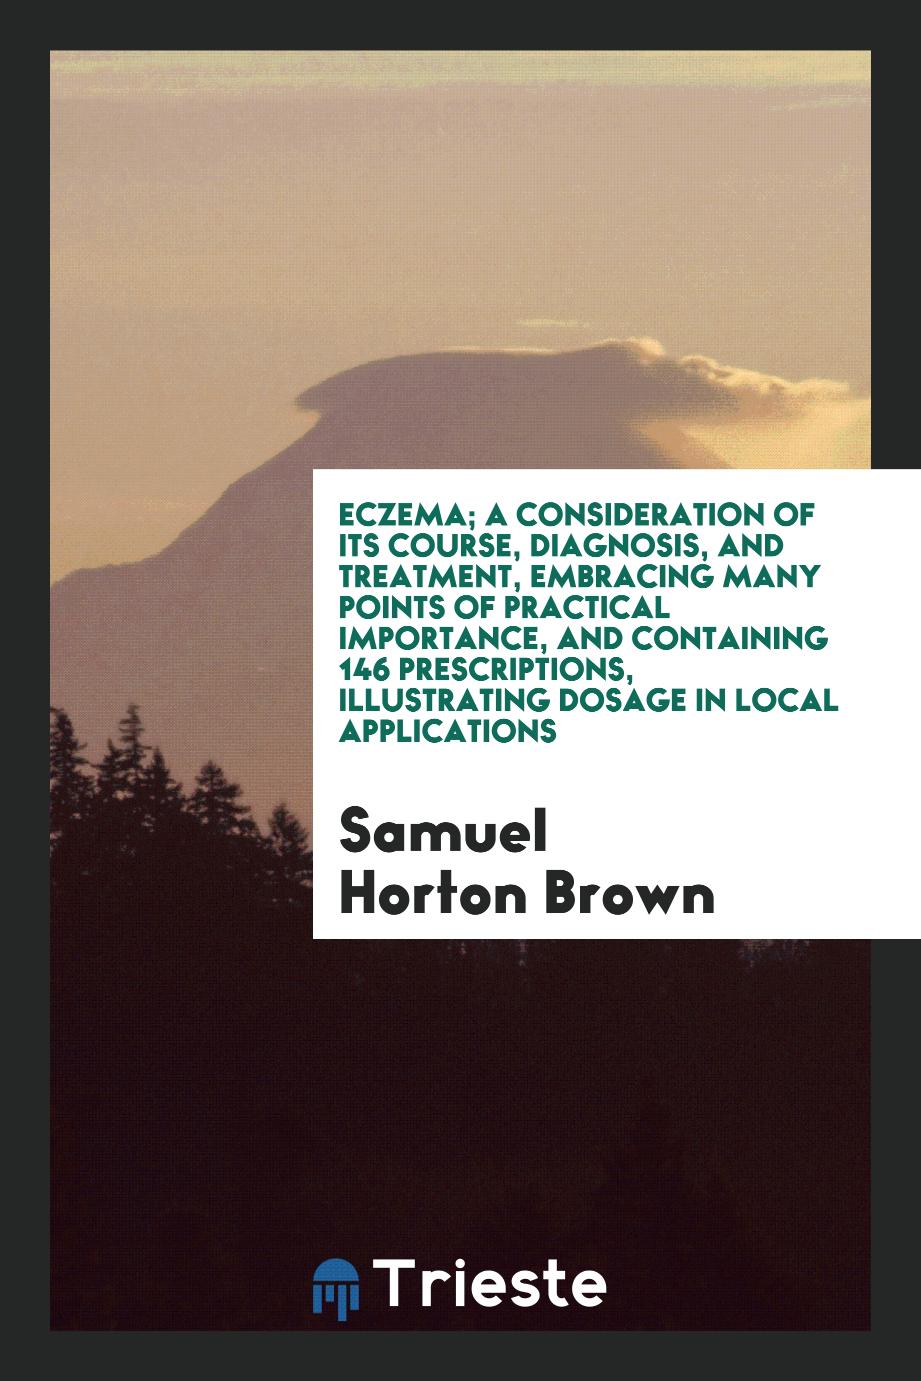 Eczema; A Consideration of Its Course, Diagnosis, and Treatment, Embracing Many Points of Practical Importance, and Containing 146 Prescriptions, Illustrating Dosage in Local Applications